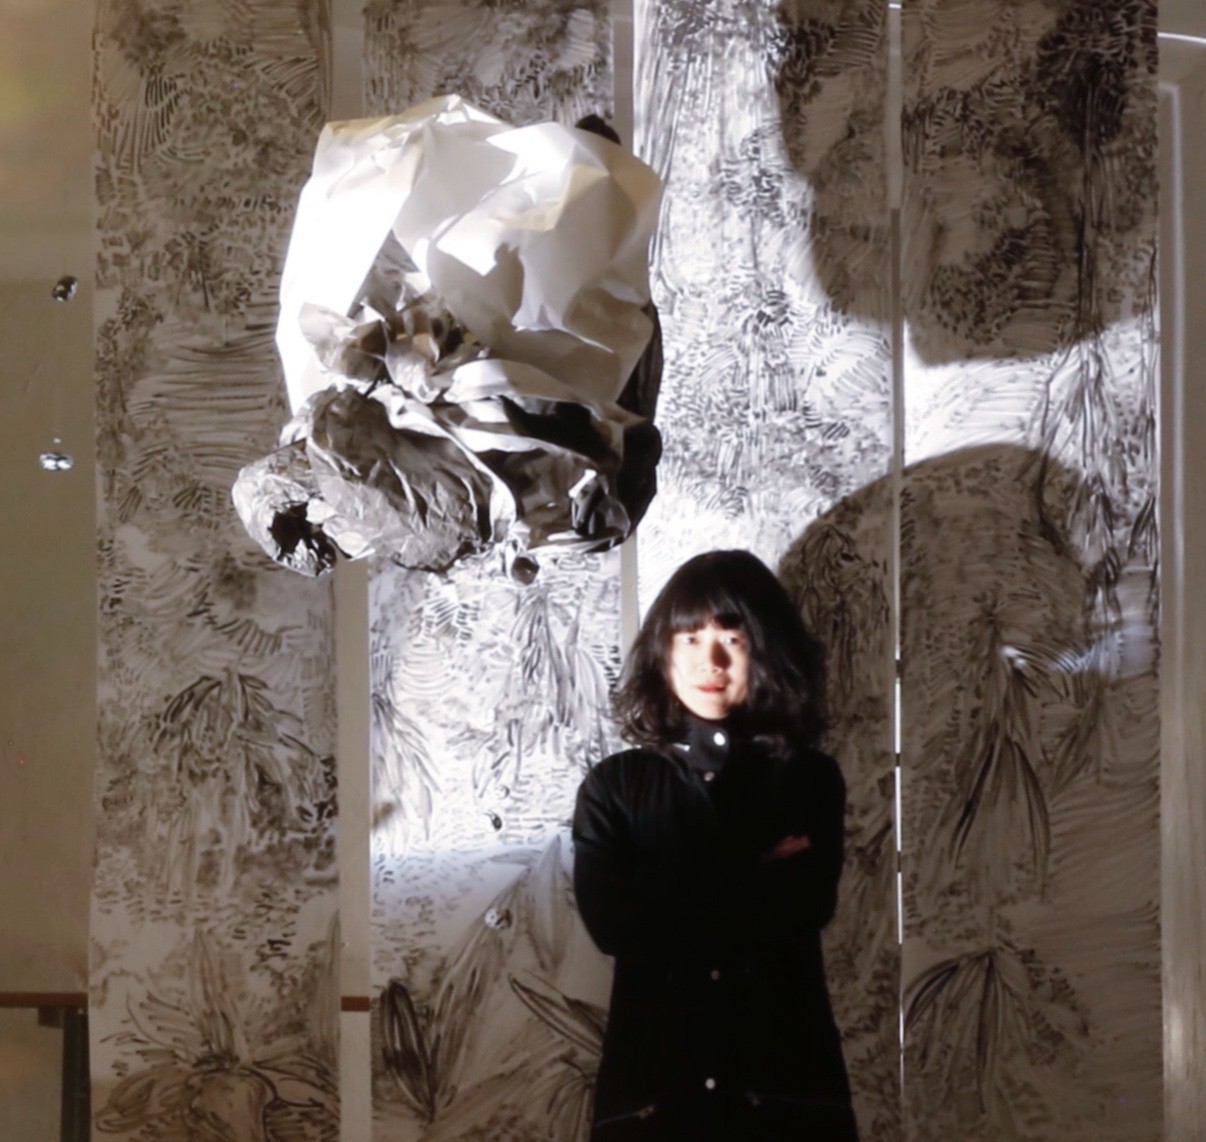 Fei Li is featured center in front of a backdrop, a large drawing of leaves. Fei Li is wearing all black and is standing underneath an orb-like paper sculpture. The lighting in the room is high contrast, with a floodlight on the artist and much of the photograph shadowed or dimly-lit.